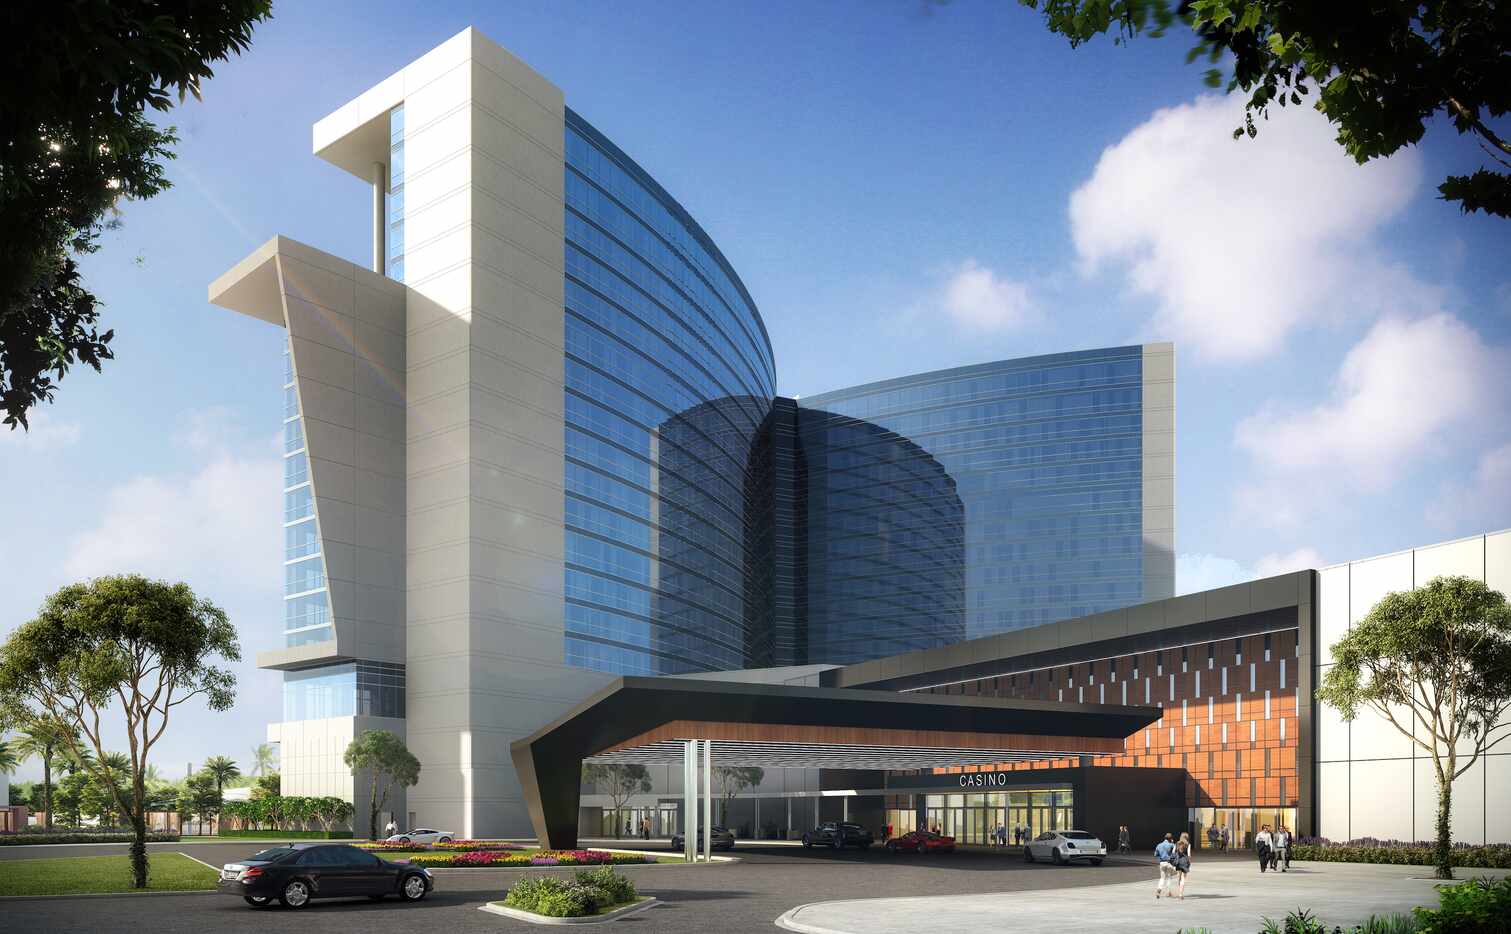 Choctaw Casino & Resort's addition will add more than 1,000 jobs.